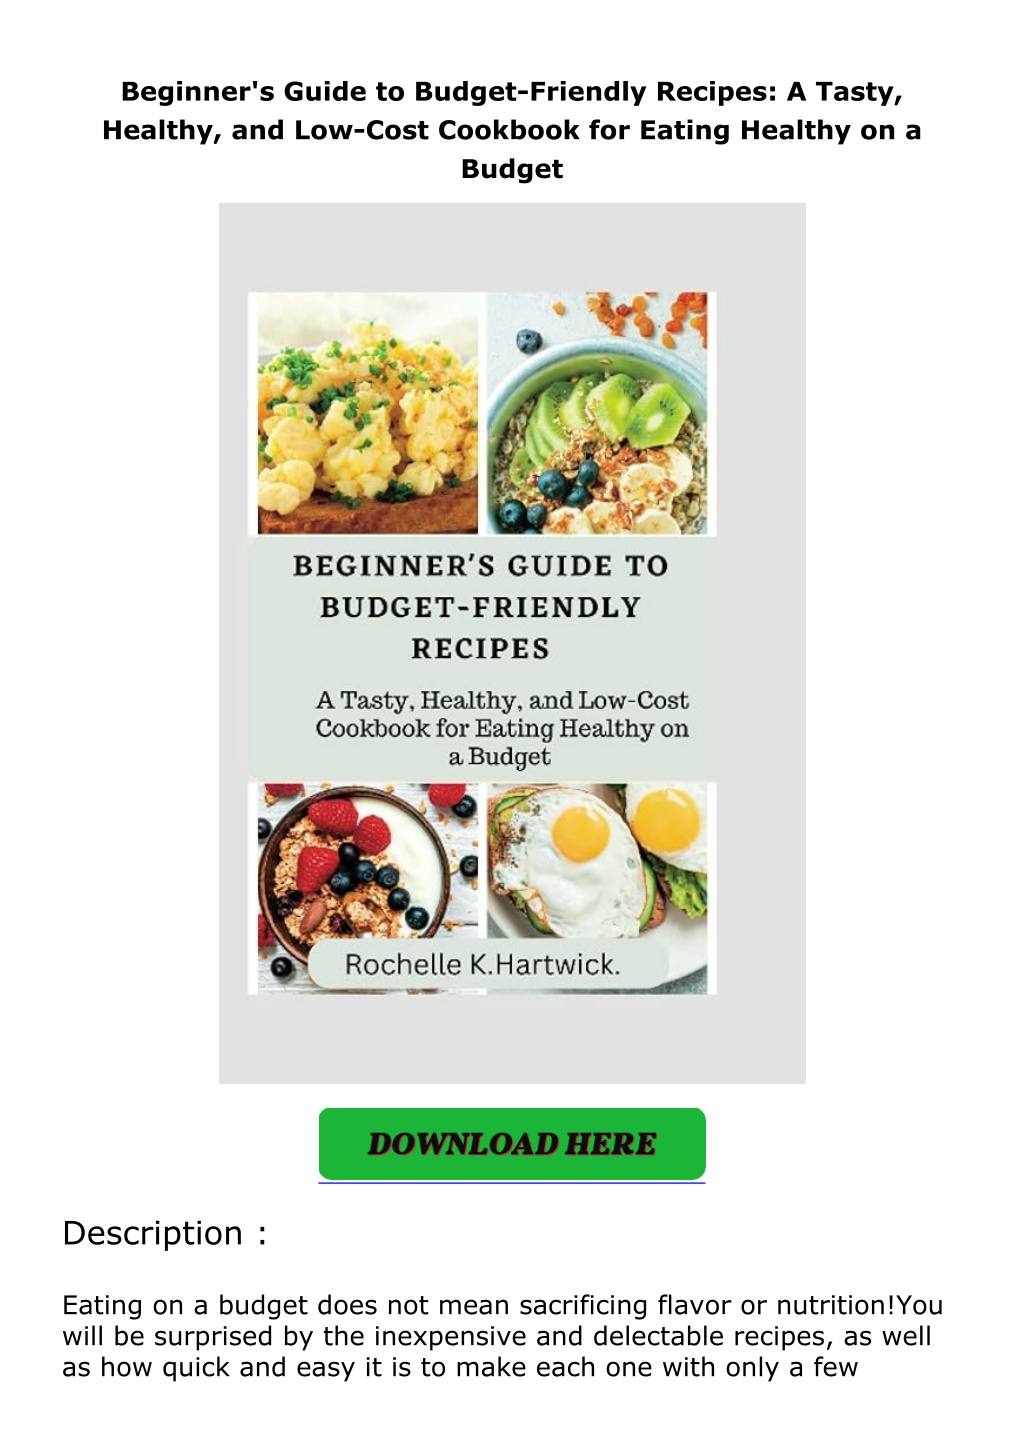 beginner s guide to budget friendly recipes l.w